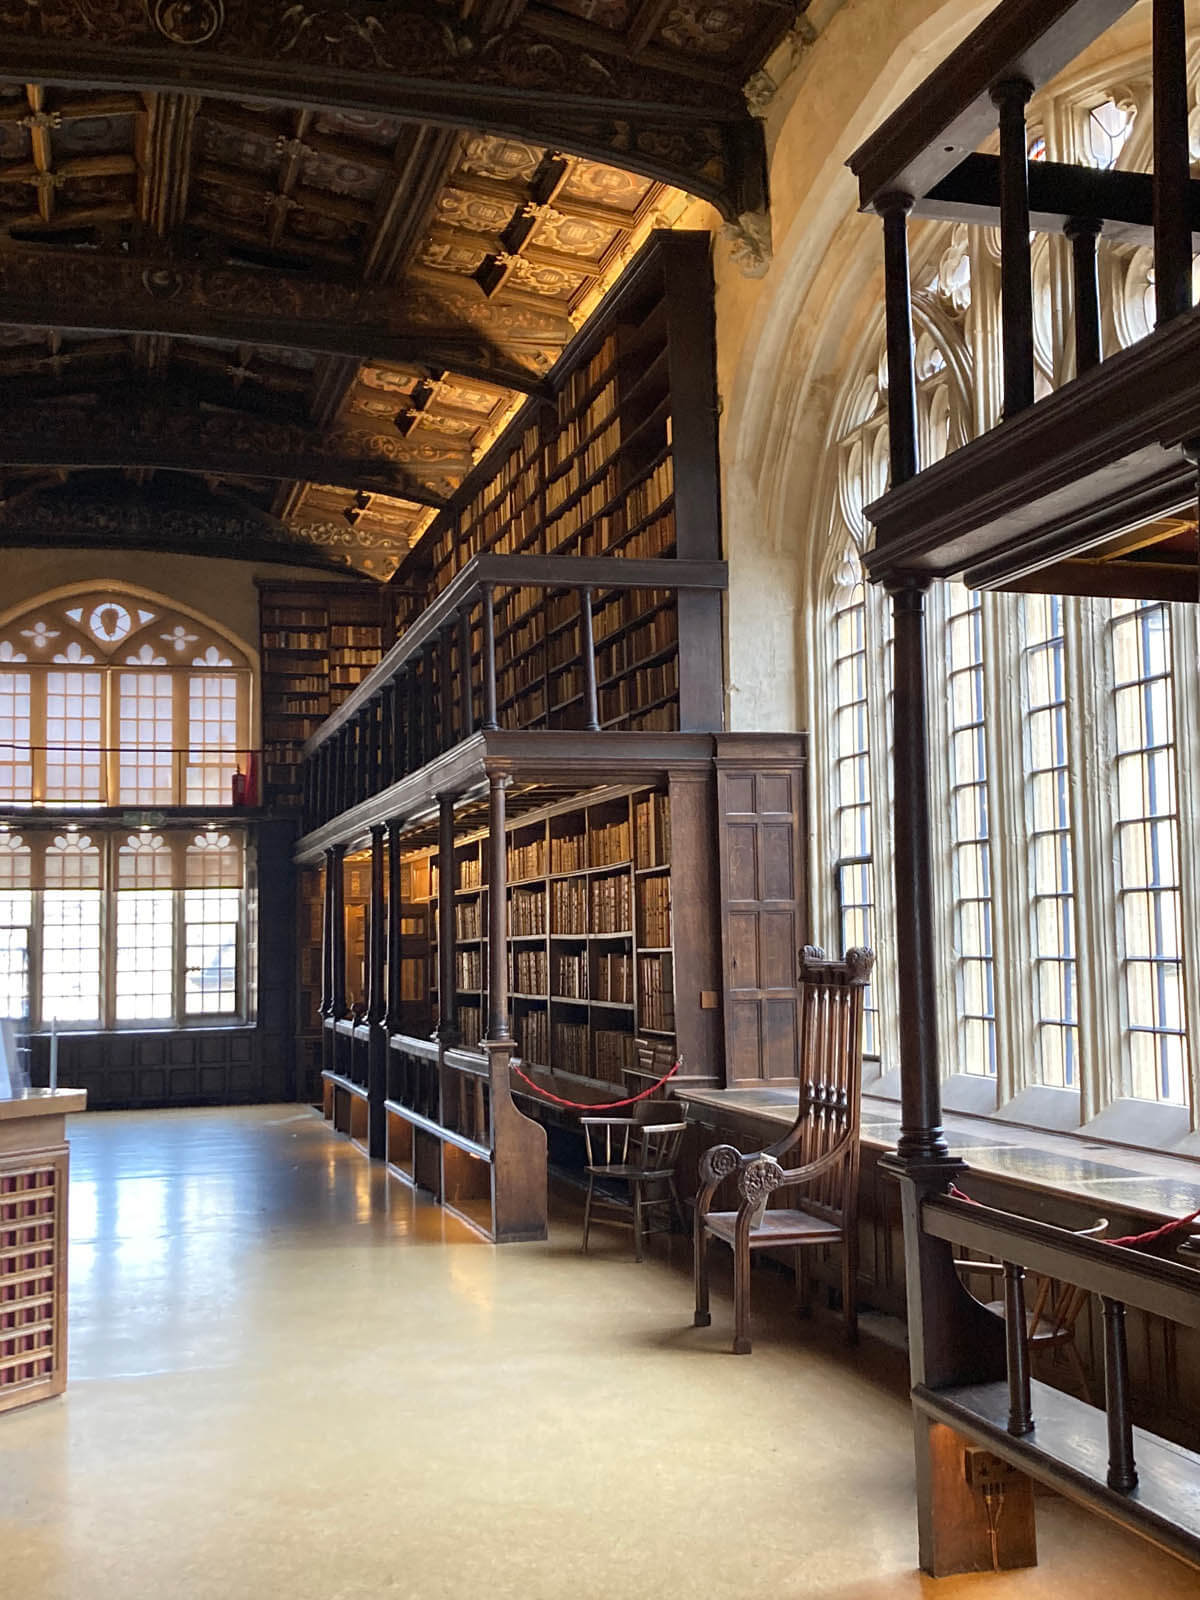 The Bodleian Library is one of the oldest libraries in Europe, and in Britain is second in size only to the British Library. Together, the Bodleian Libraries hold over 13 million printed items and was first opened to scholars in 1602.